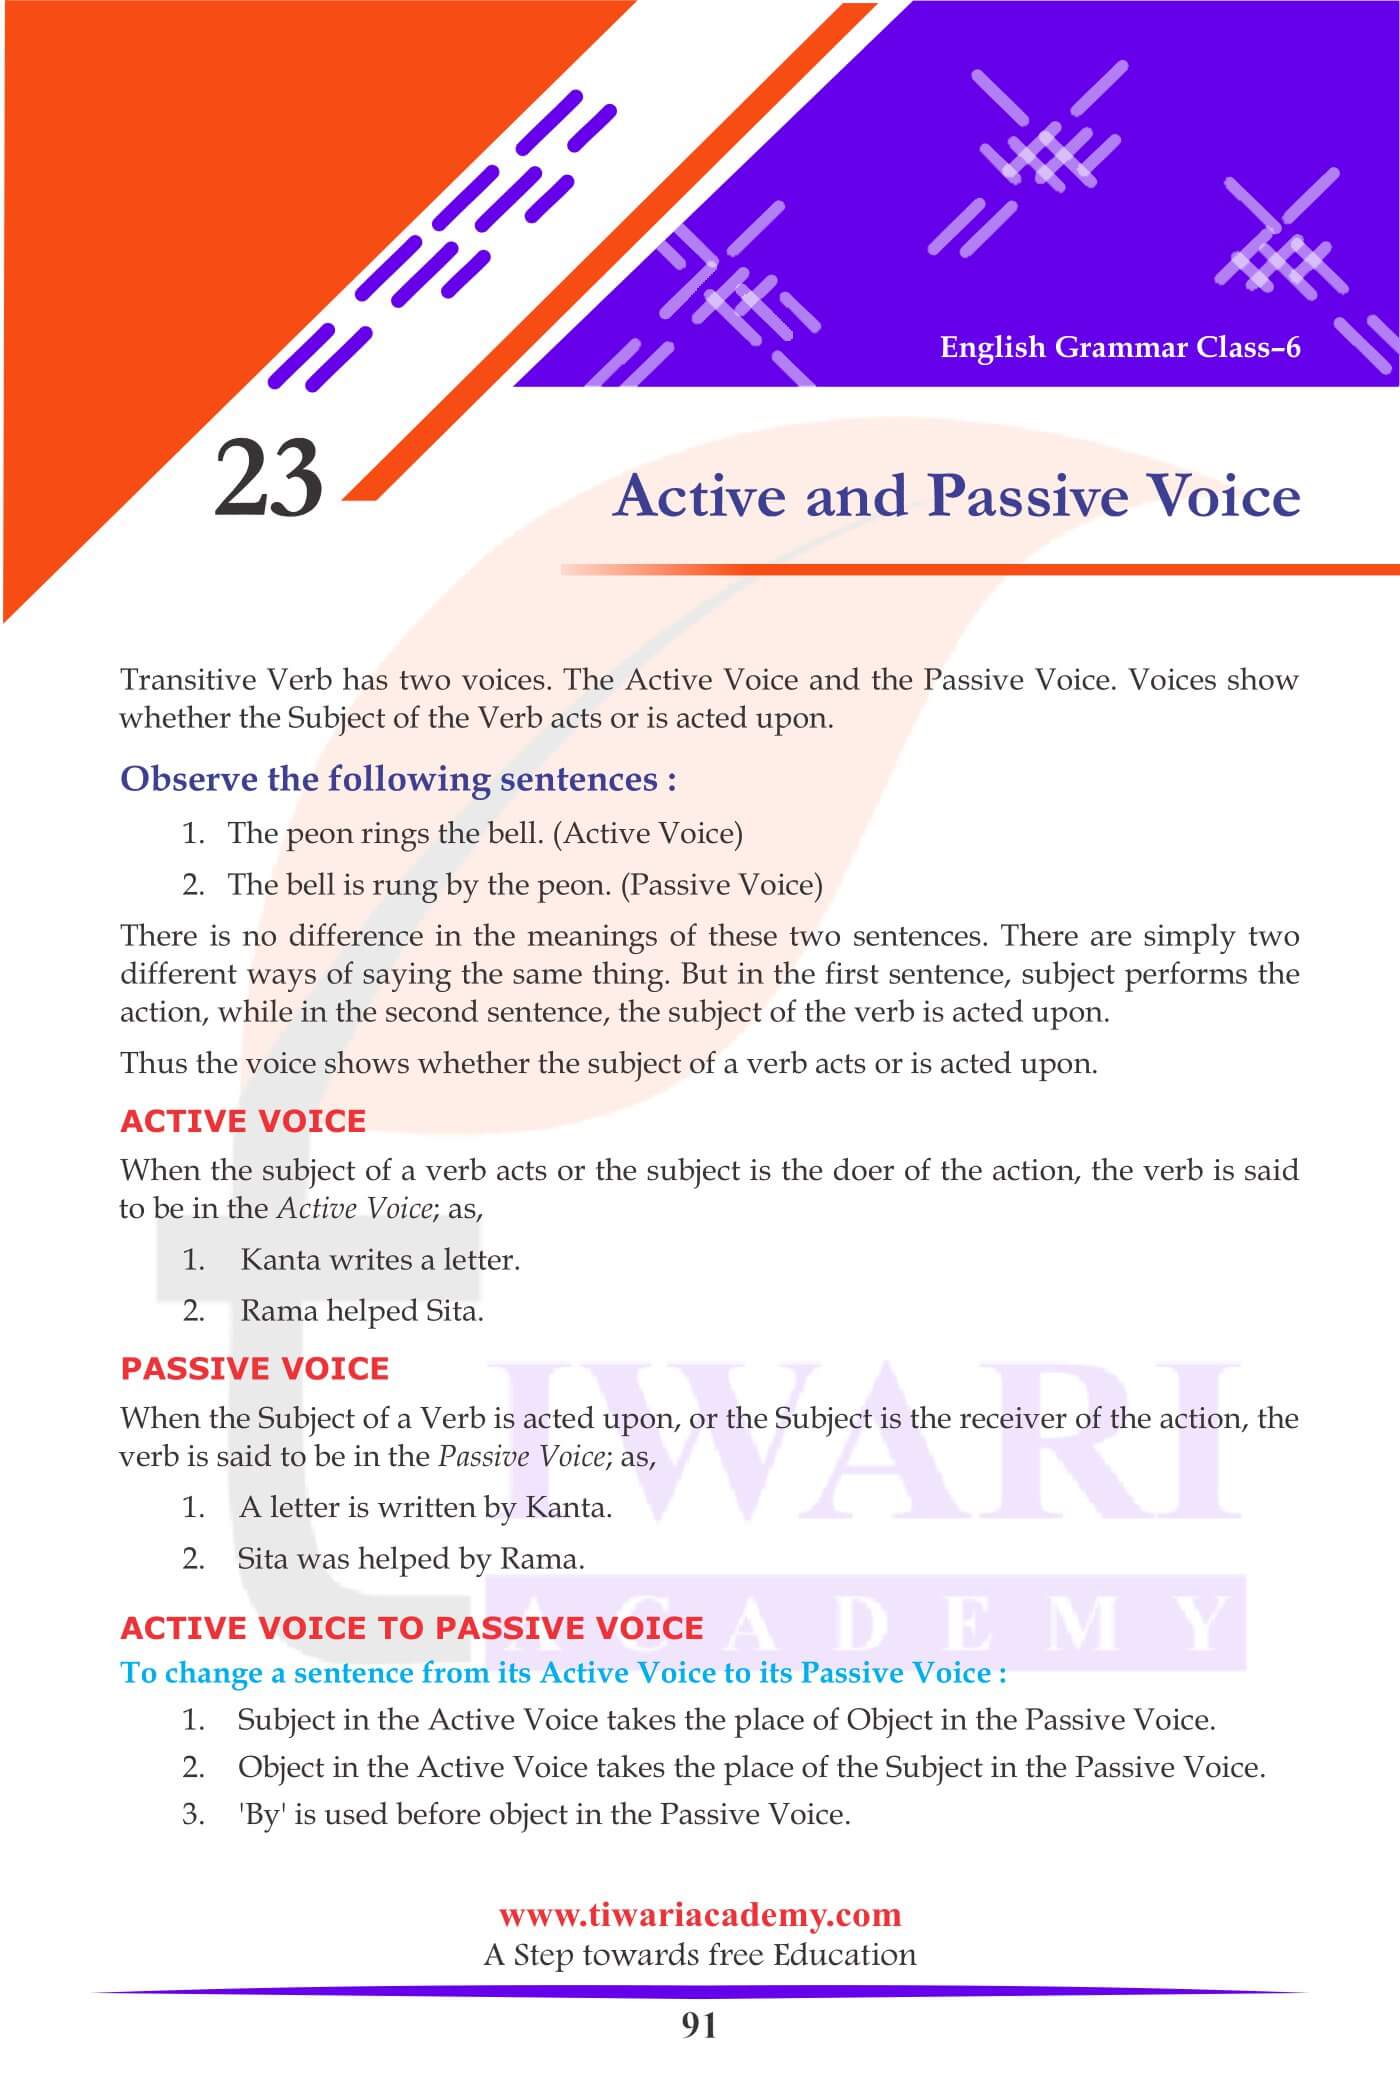 Class 6 English Grammar Chapter 23 Active and Passive Voice